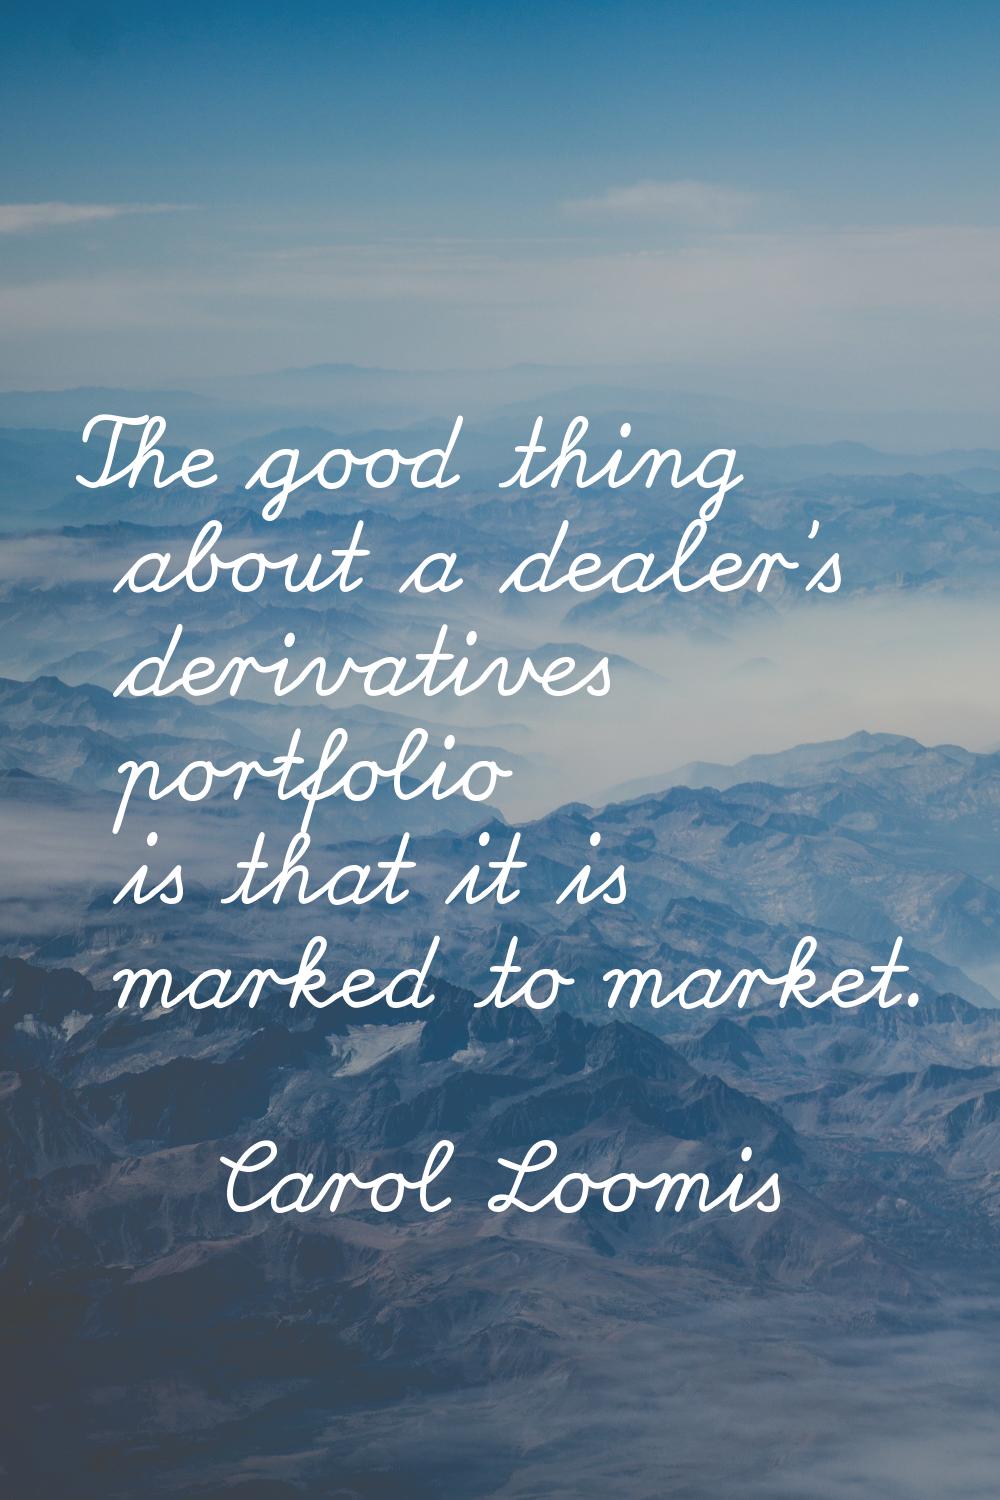 The good thing about a dealer's derivatives portfolio is that it is marked to market.